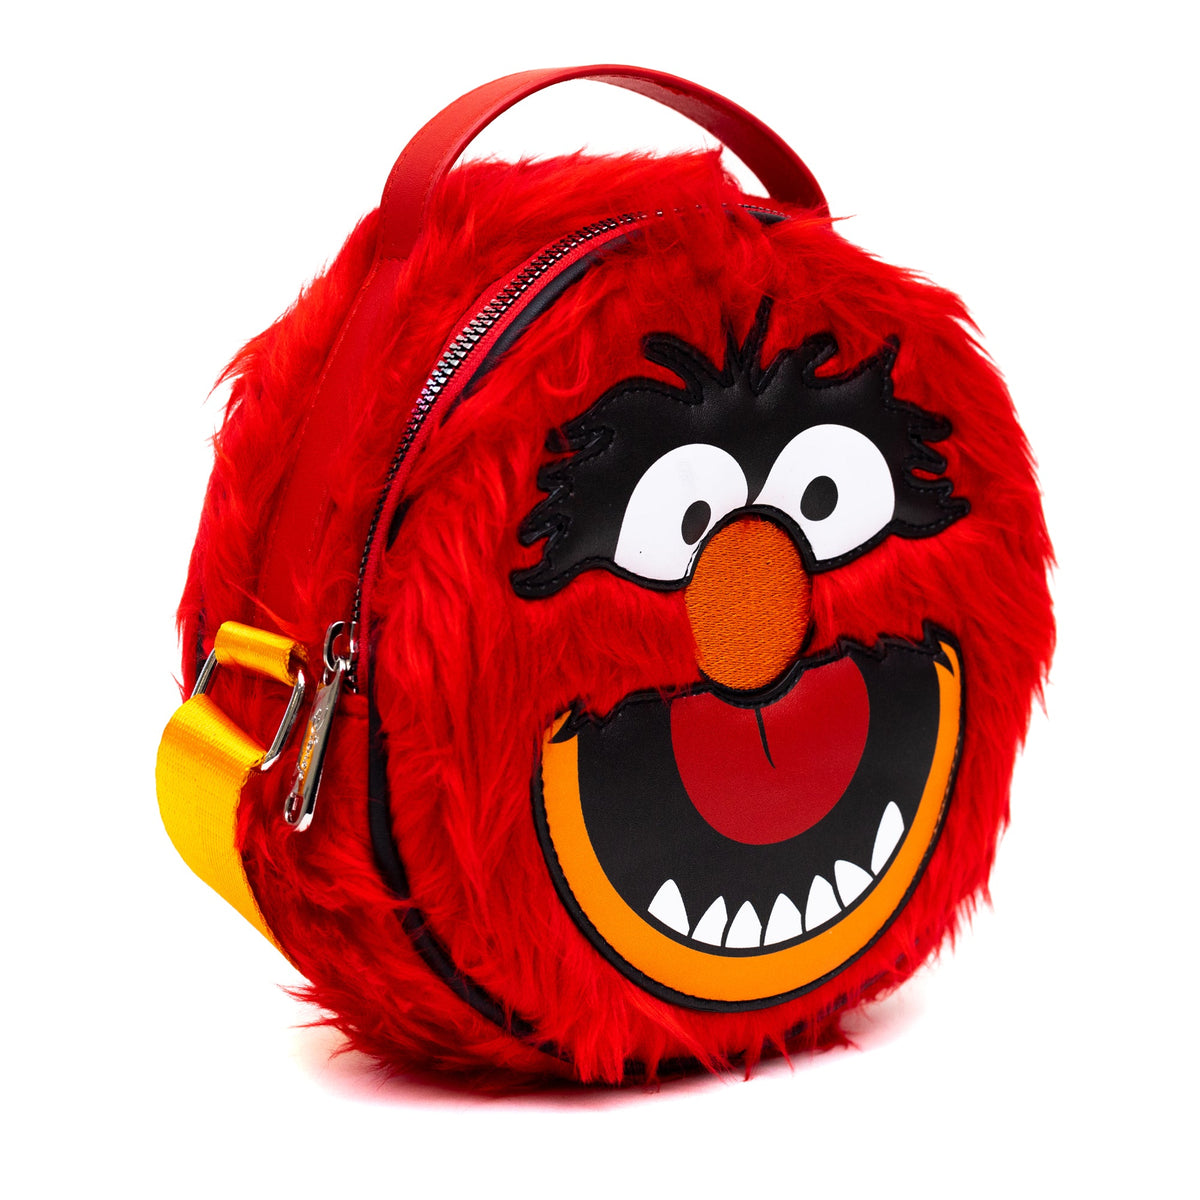 Disney Bag, Cross Body, Round, The Muppets Animal  Face Character Close-Up Faux Fur, Red, Vegan Leather